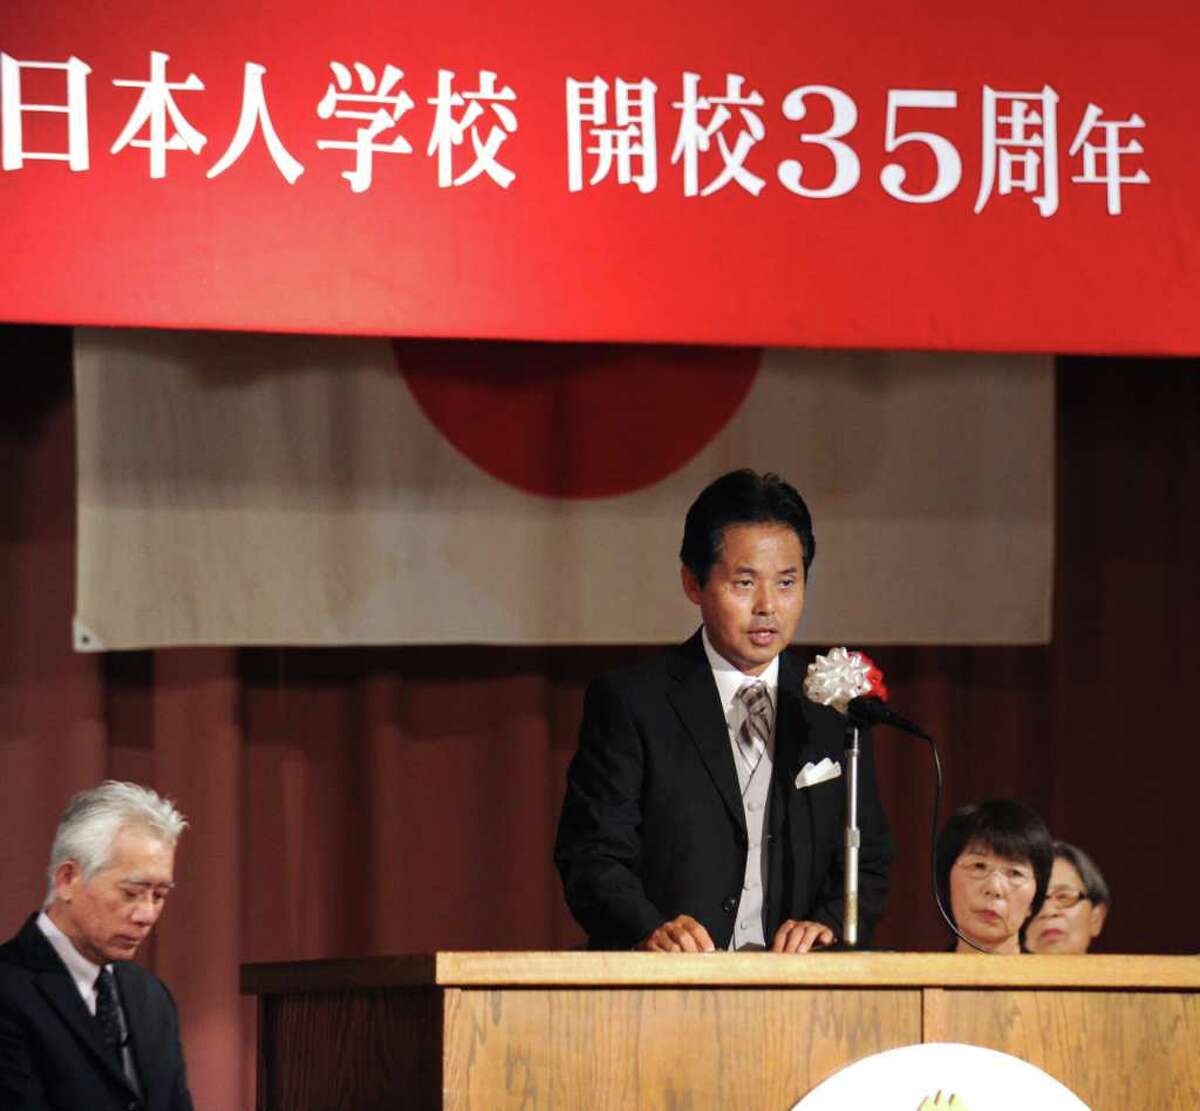 Tomoyuki Mitsui, center, principal of the Japanese School of New York located on Lake Avenue, Greenwich, addresses the audience during the celebration of the 35th anniversary of the school's founding, at the school, Thursday. Sept. 2, 2010.